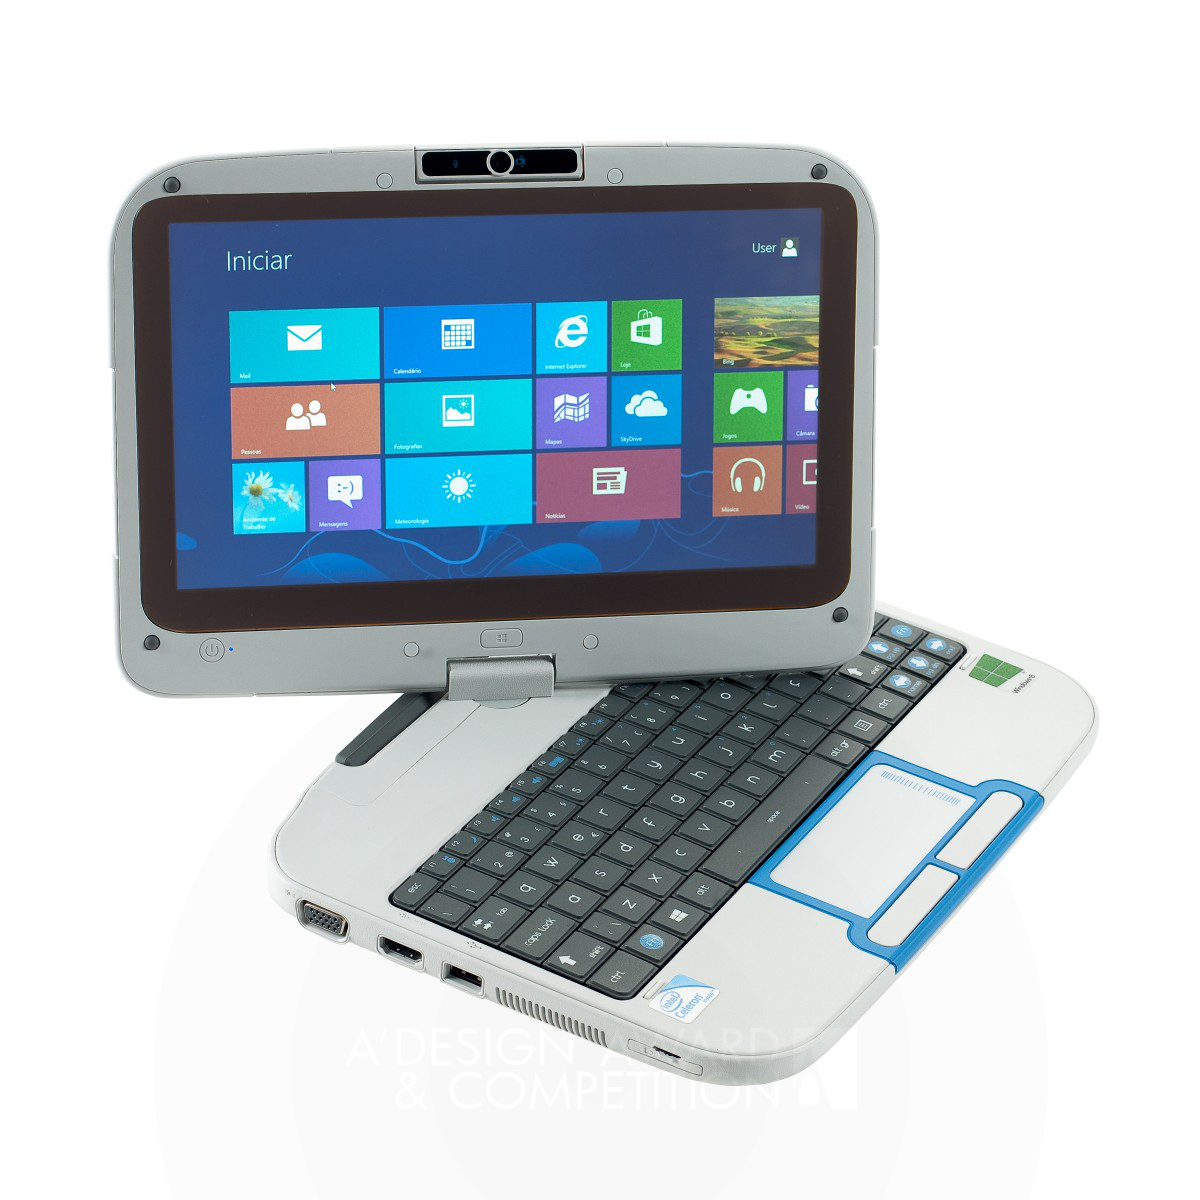 Pupil 108 Convertible Device for Education